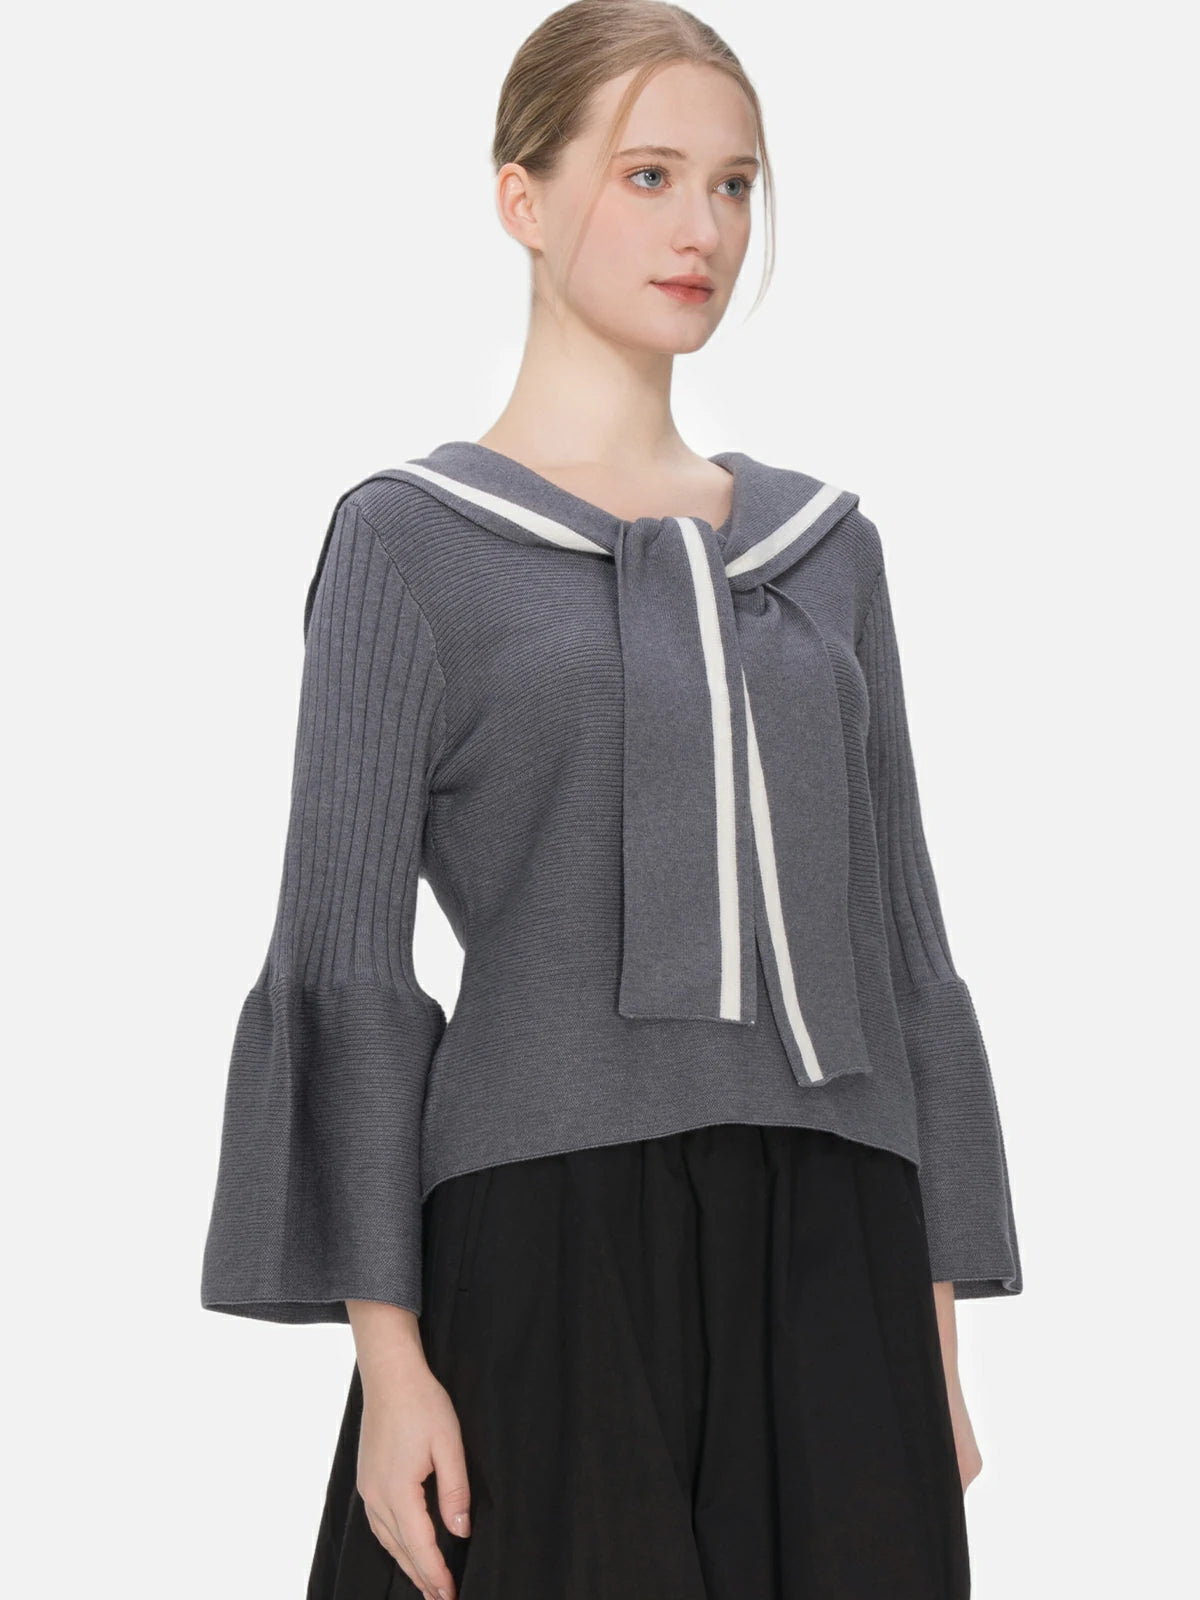 Sophisticated gray pullover with a navy collar and trumpet sleeves, offering a comfortable fit while showcasing an elegant and stylish ensemble.